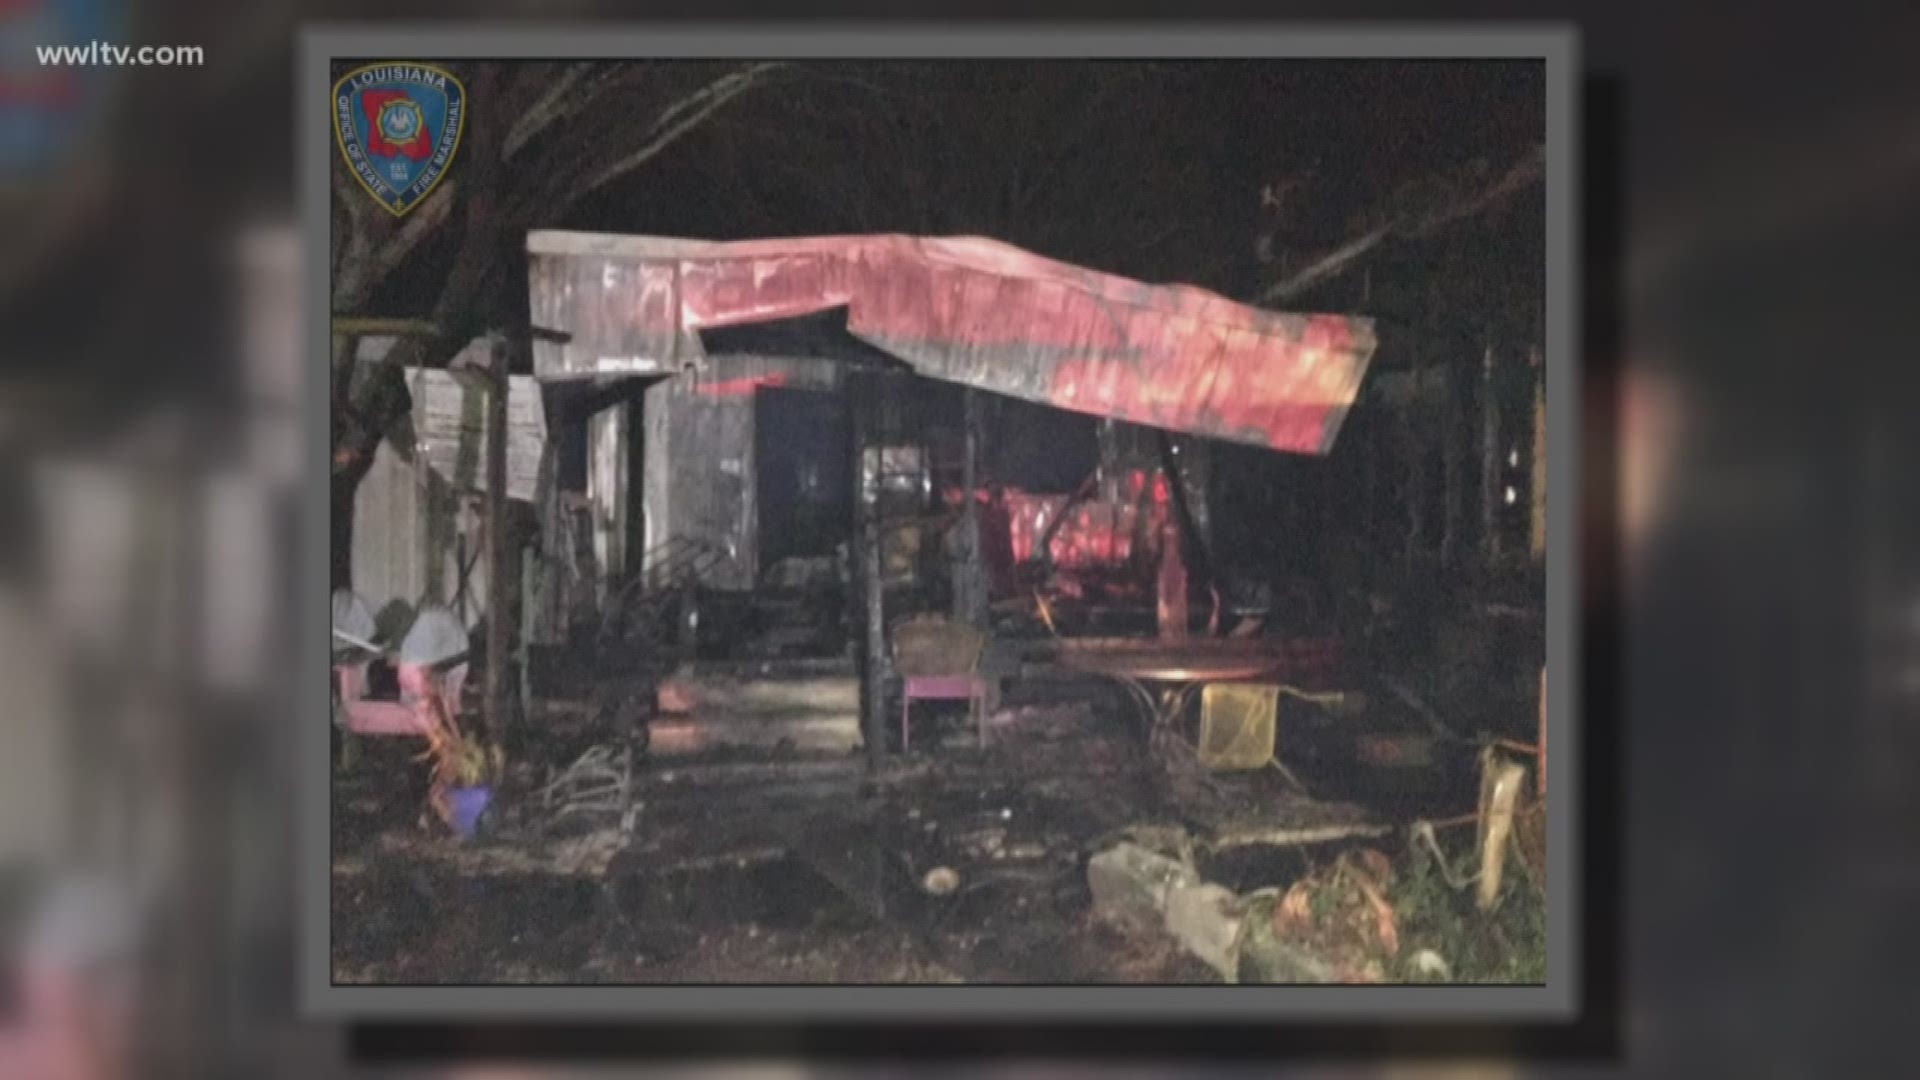 According to the Louisiana Fire Marshal's Office, the Belle Chasse Volunteer fire department responded to a fire in the 11000 block of Highway 23.